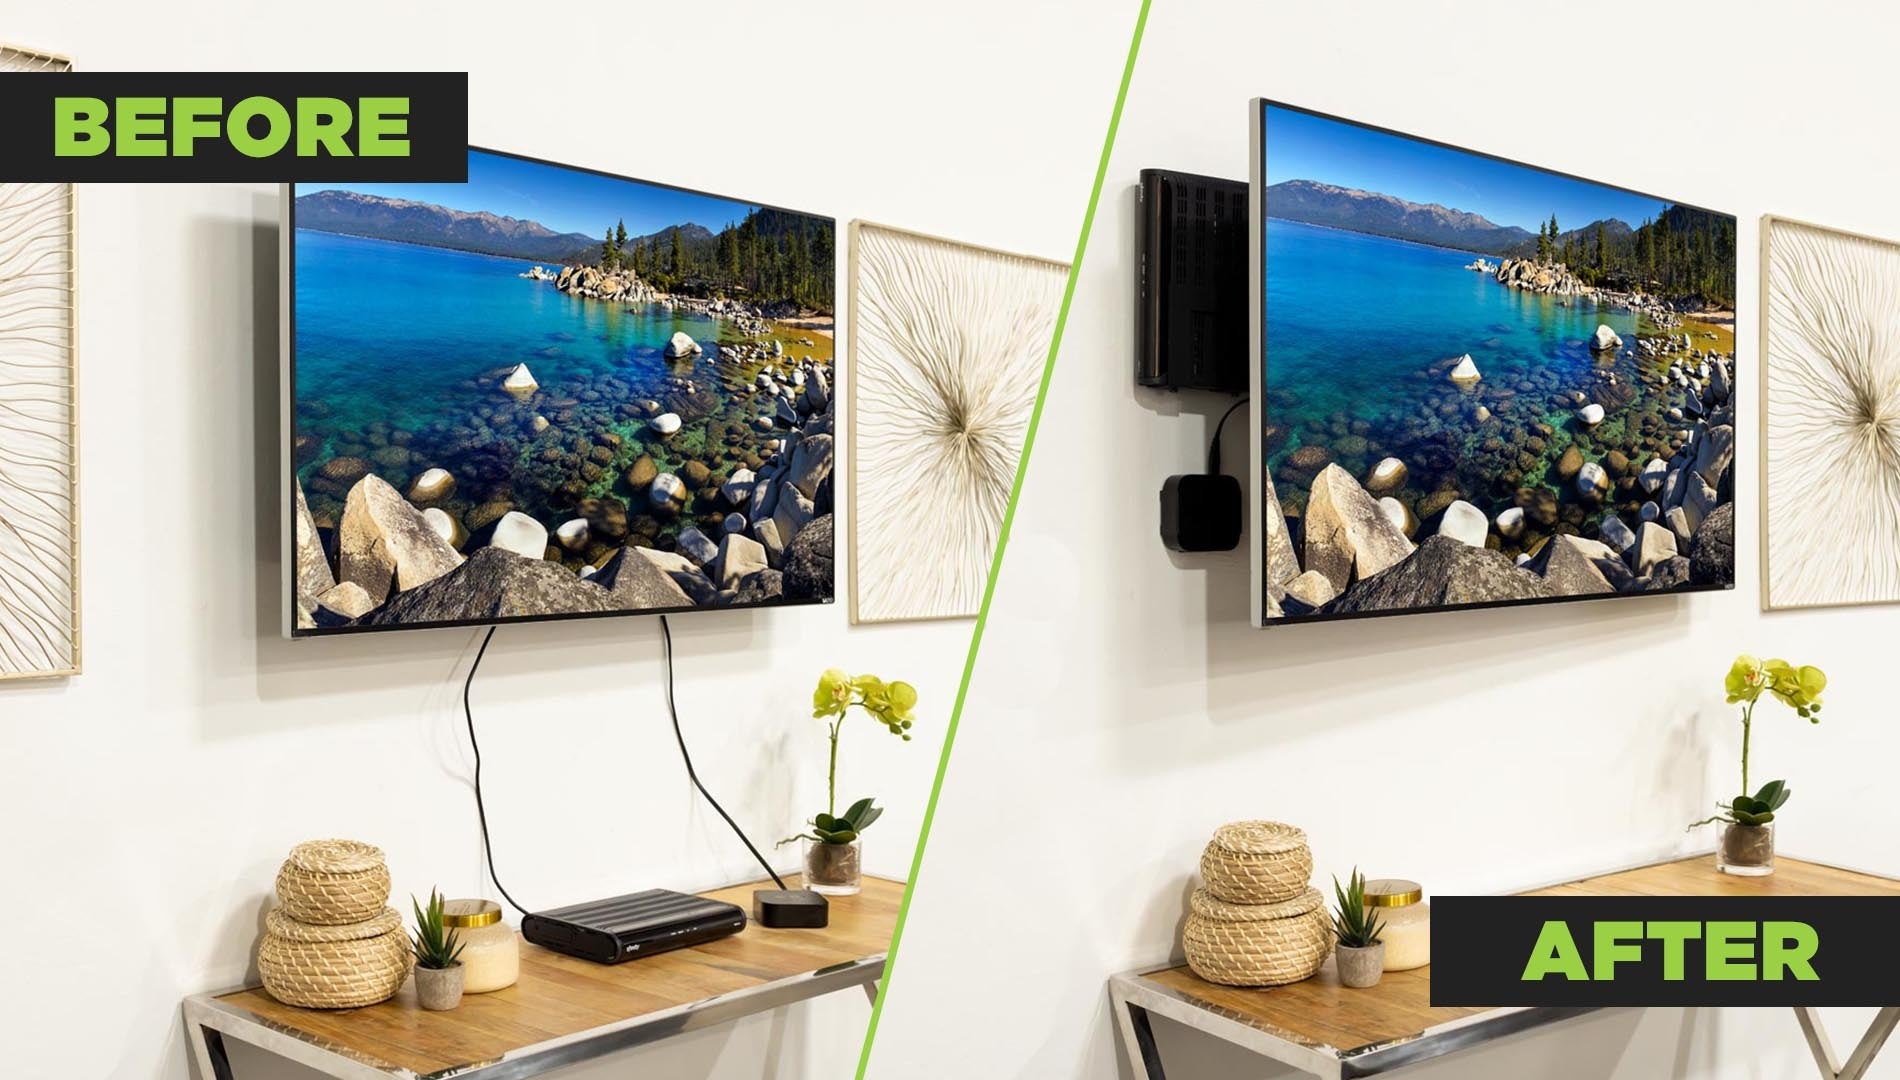 How High Should You Mount A TV On The Wall? - House Of Hipsters